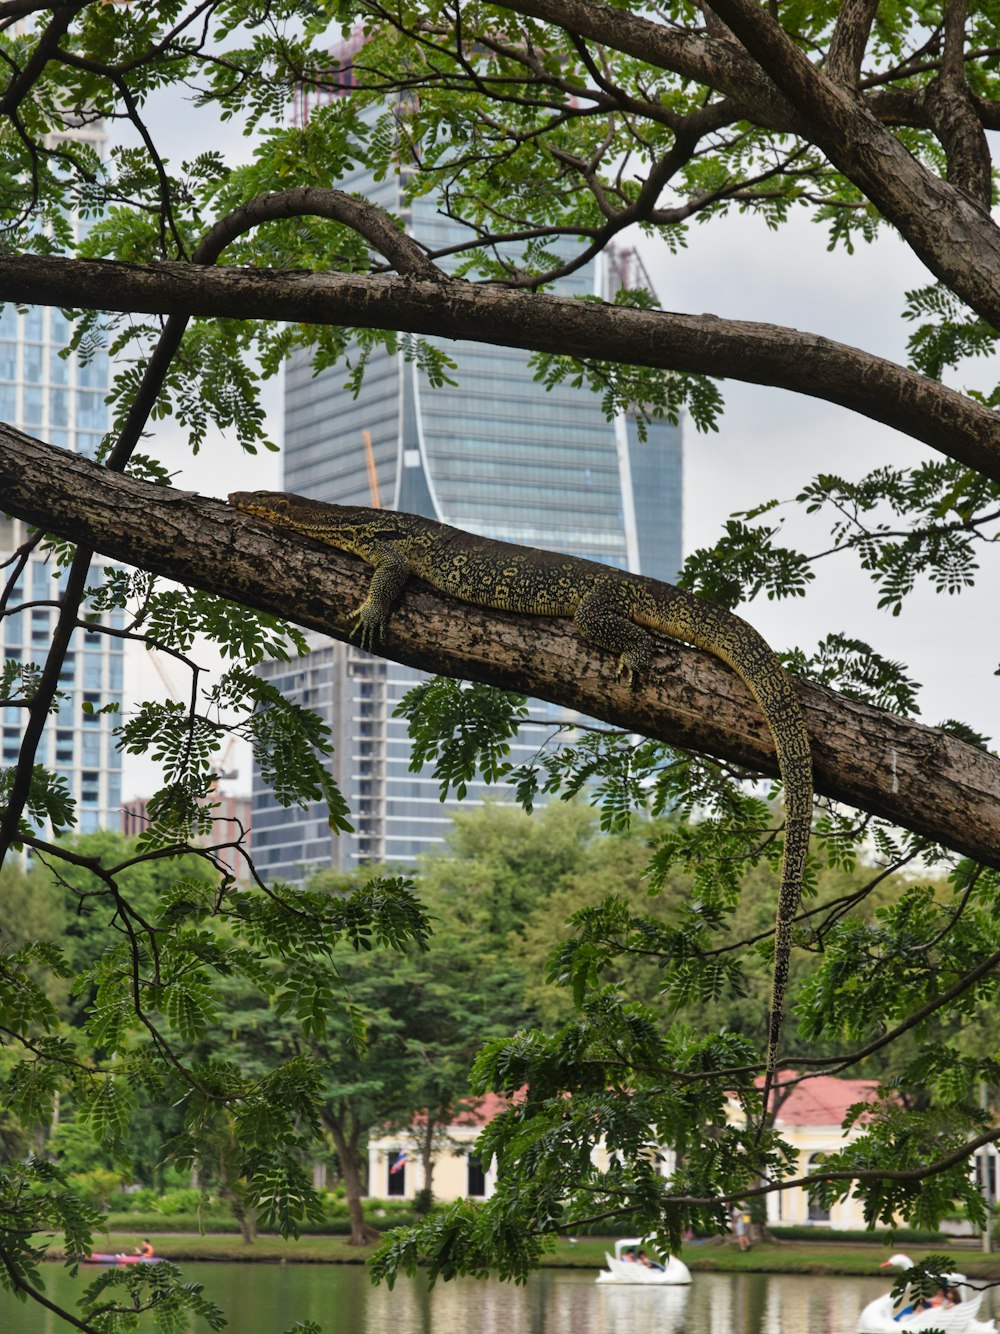 a lizard is sitting on a tree branch by the water